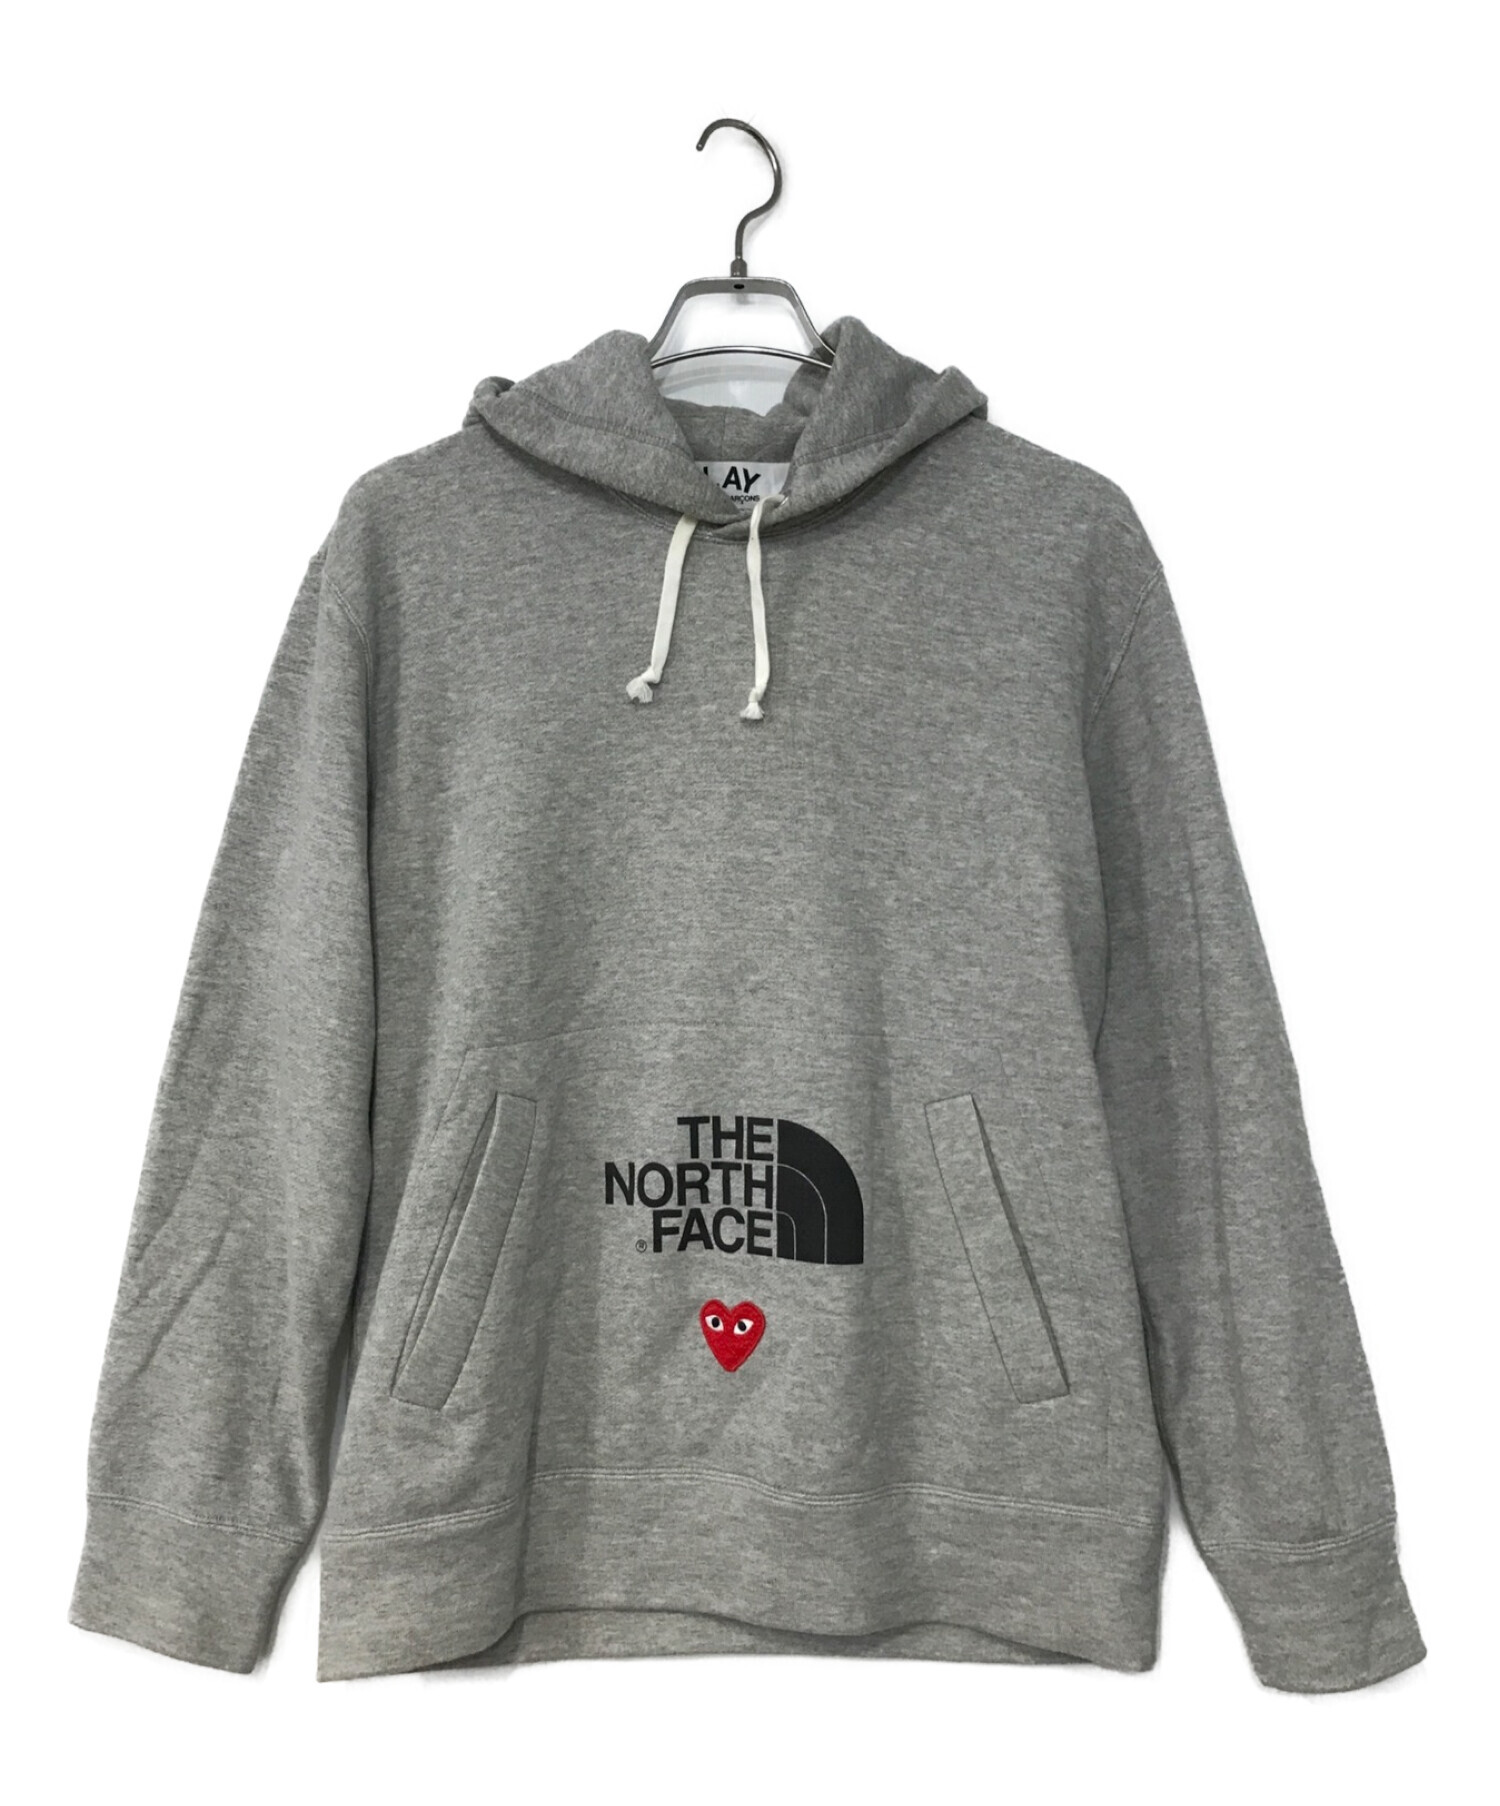 PLAY COMME des GARCONS×THE NORTH FACE (プレイコムデギャルソン×ザノースフェイス) Pullover  Hoodie グレー サイズ:M